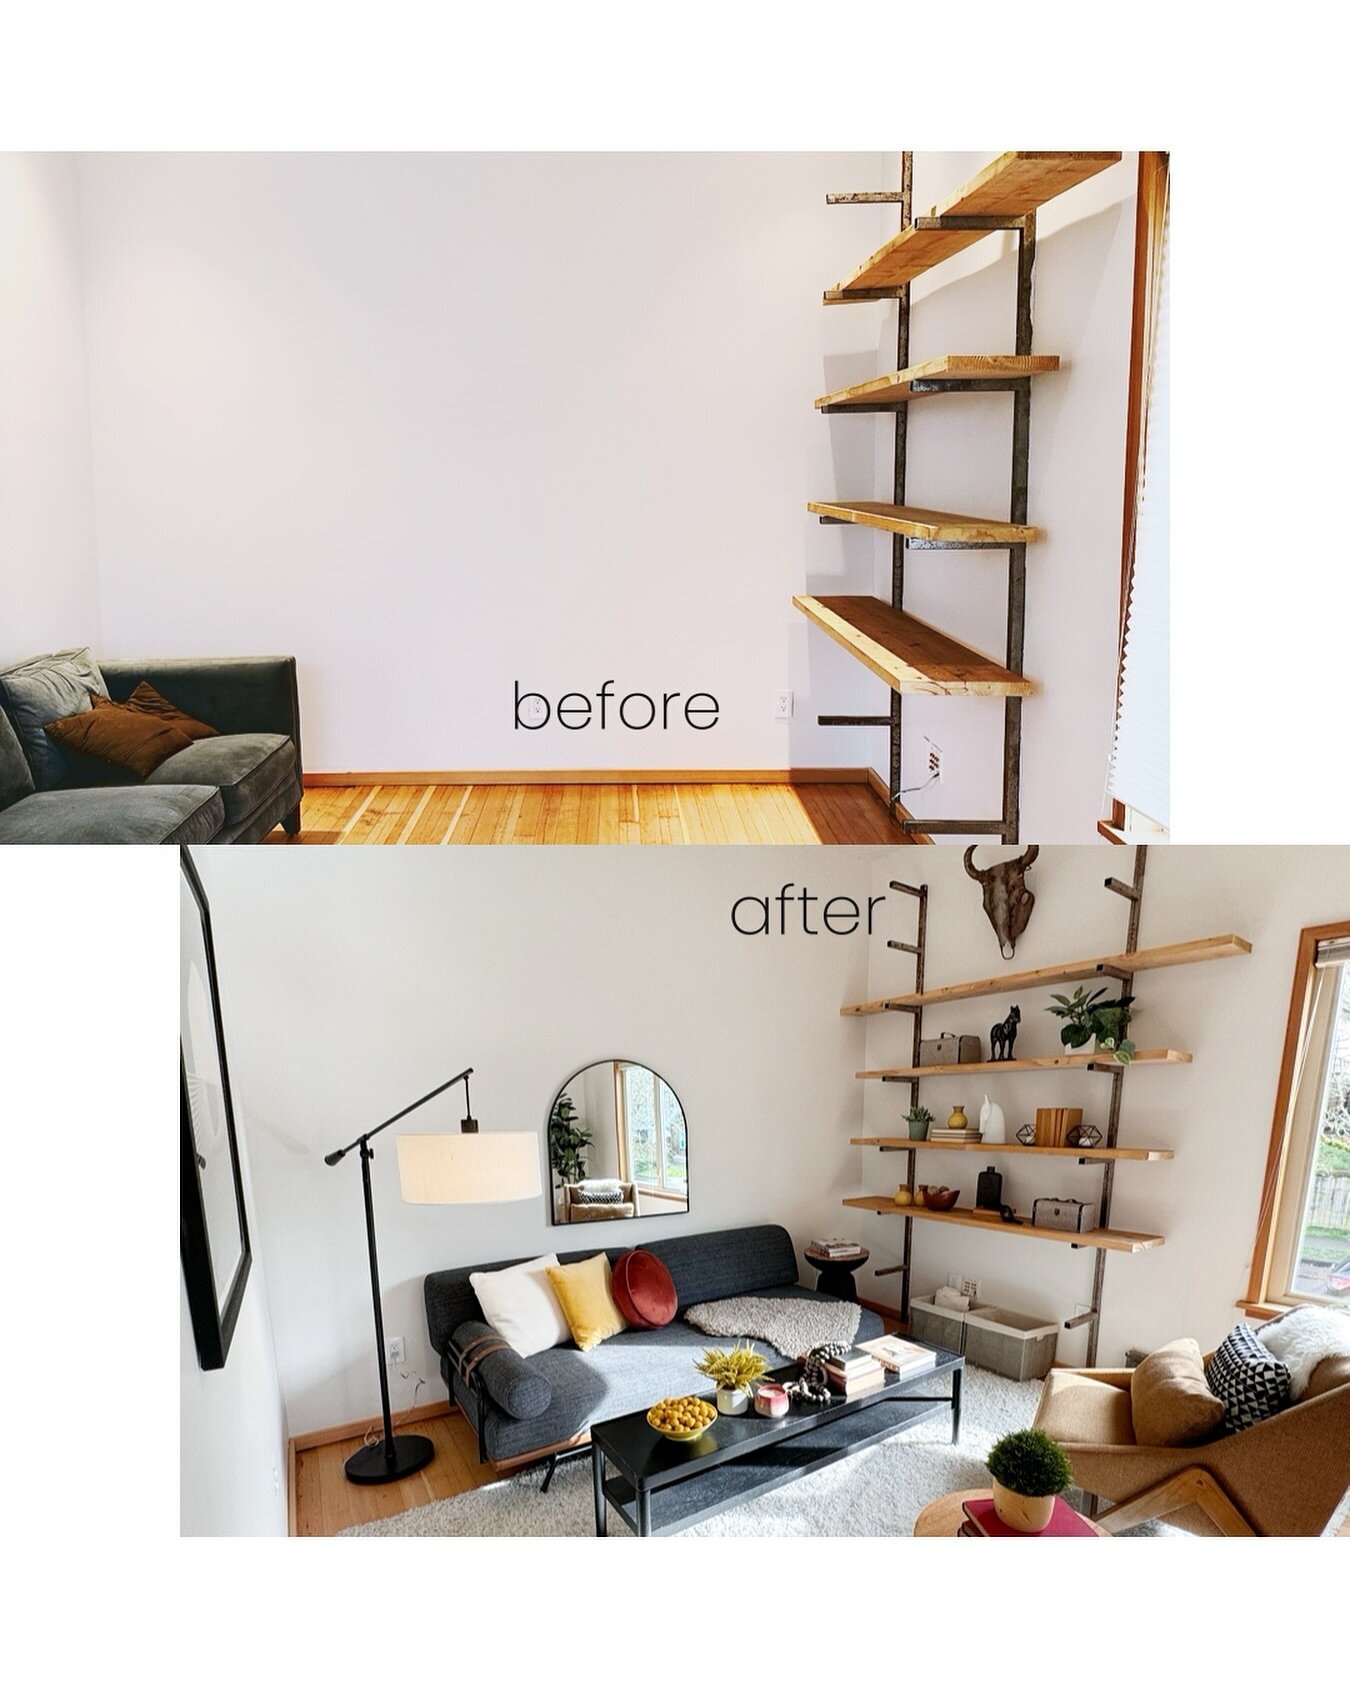 Transforming traditional spaces with a modern organic touch, blending industrial woodwork seamlessly into the heart of the home. 🏡✨

 #HomeTransformation #ModernOrganic #IndustrialWoodwork #beforeandafter #homedesign #staginghomes #homestaging #real